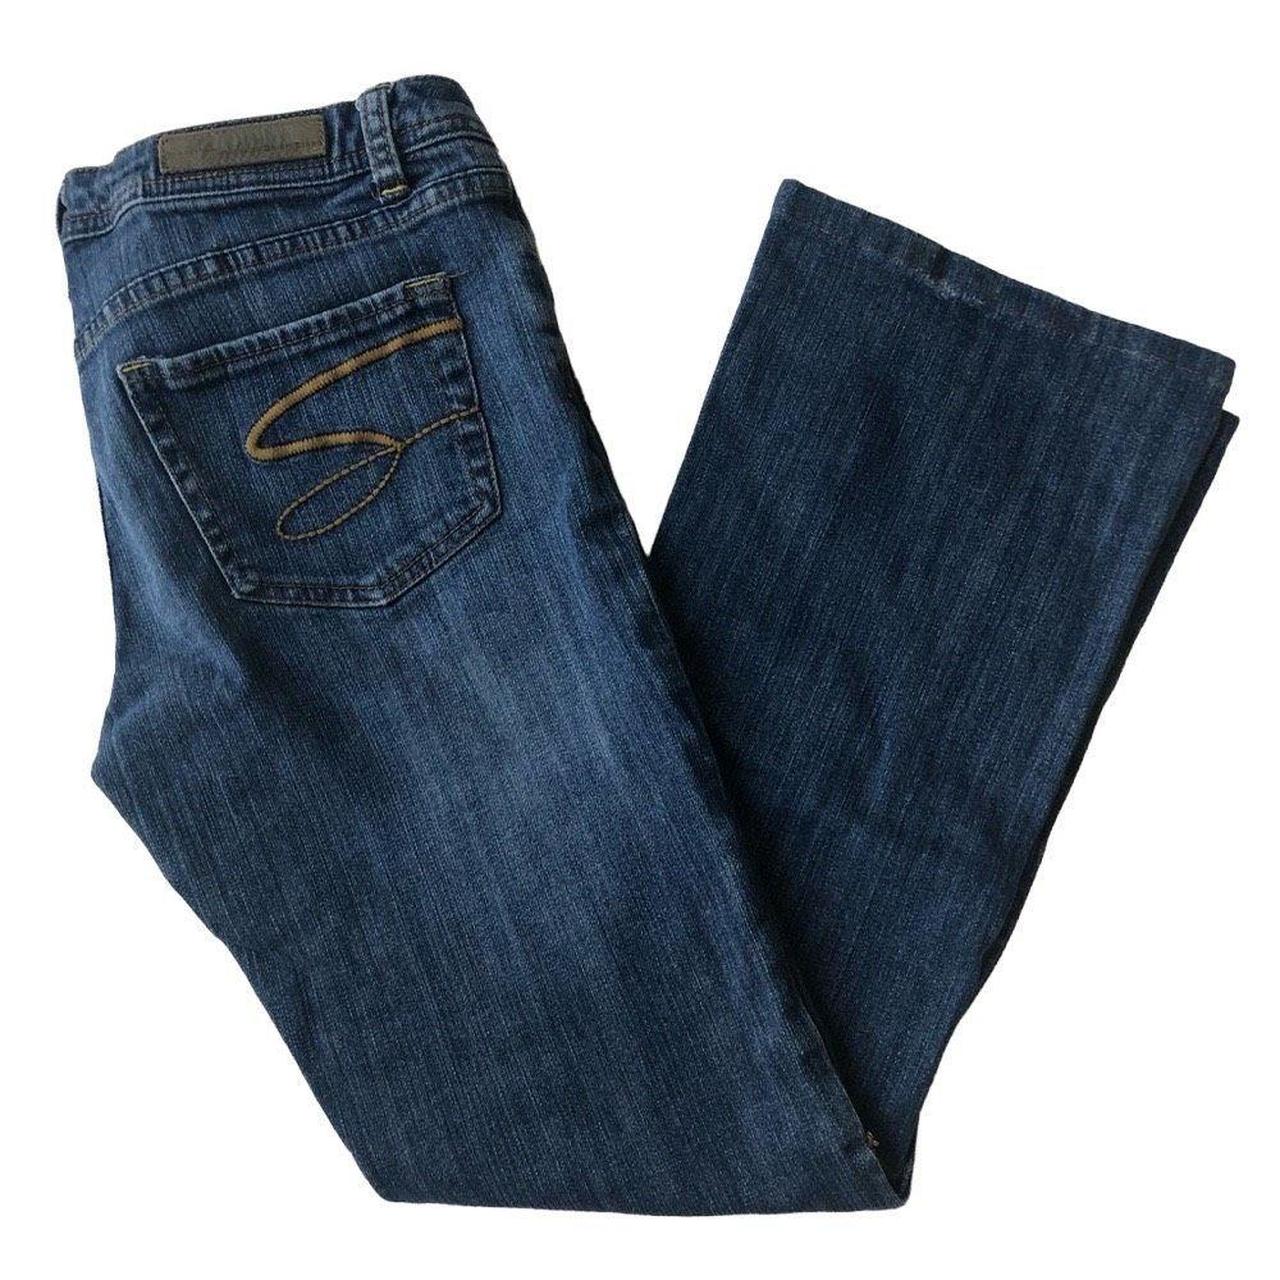 Seven7 Classic Flare Jeans for Women